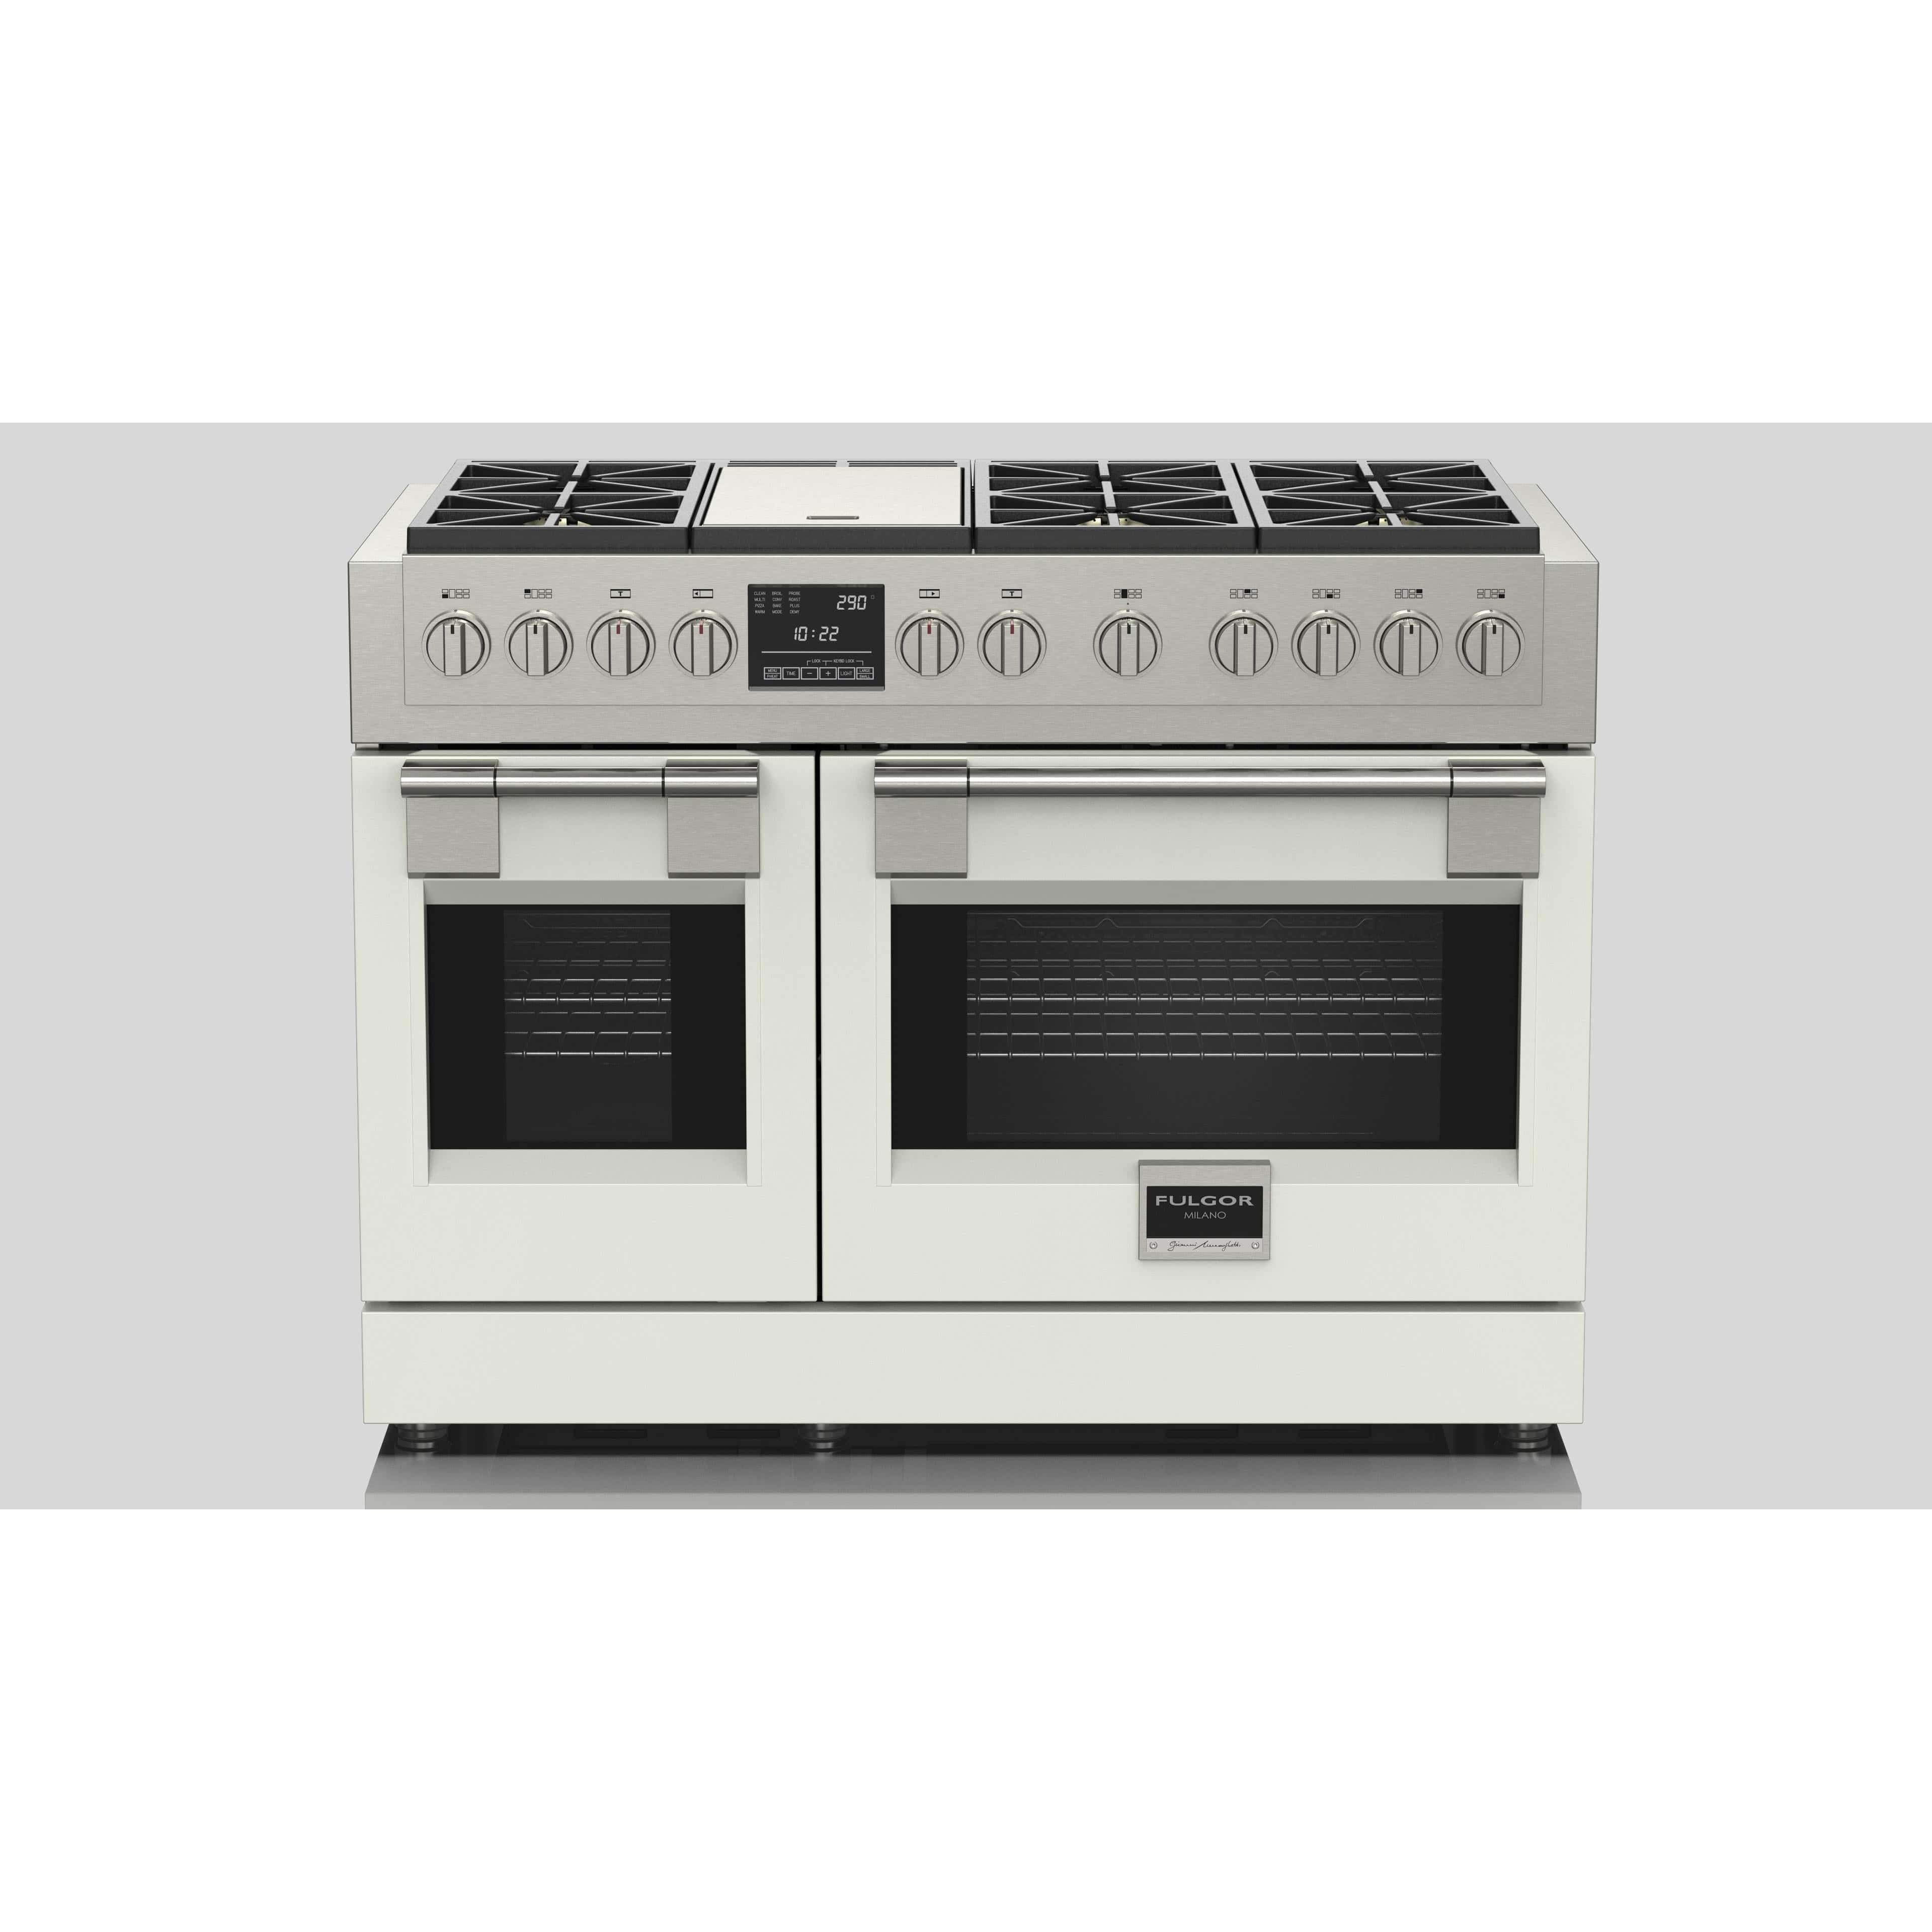 Fulgor Milano 48" Dual Fuel Professional Range with 6 Dual Flame Burners,  6.5 Cu. Ft. Total Capacity Stainless Steel - F6PDF486GS1 Ranges PDRKIT48MW Luxury Appliances Direct